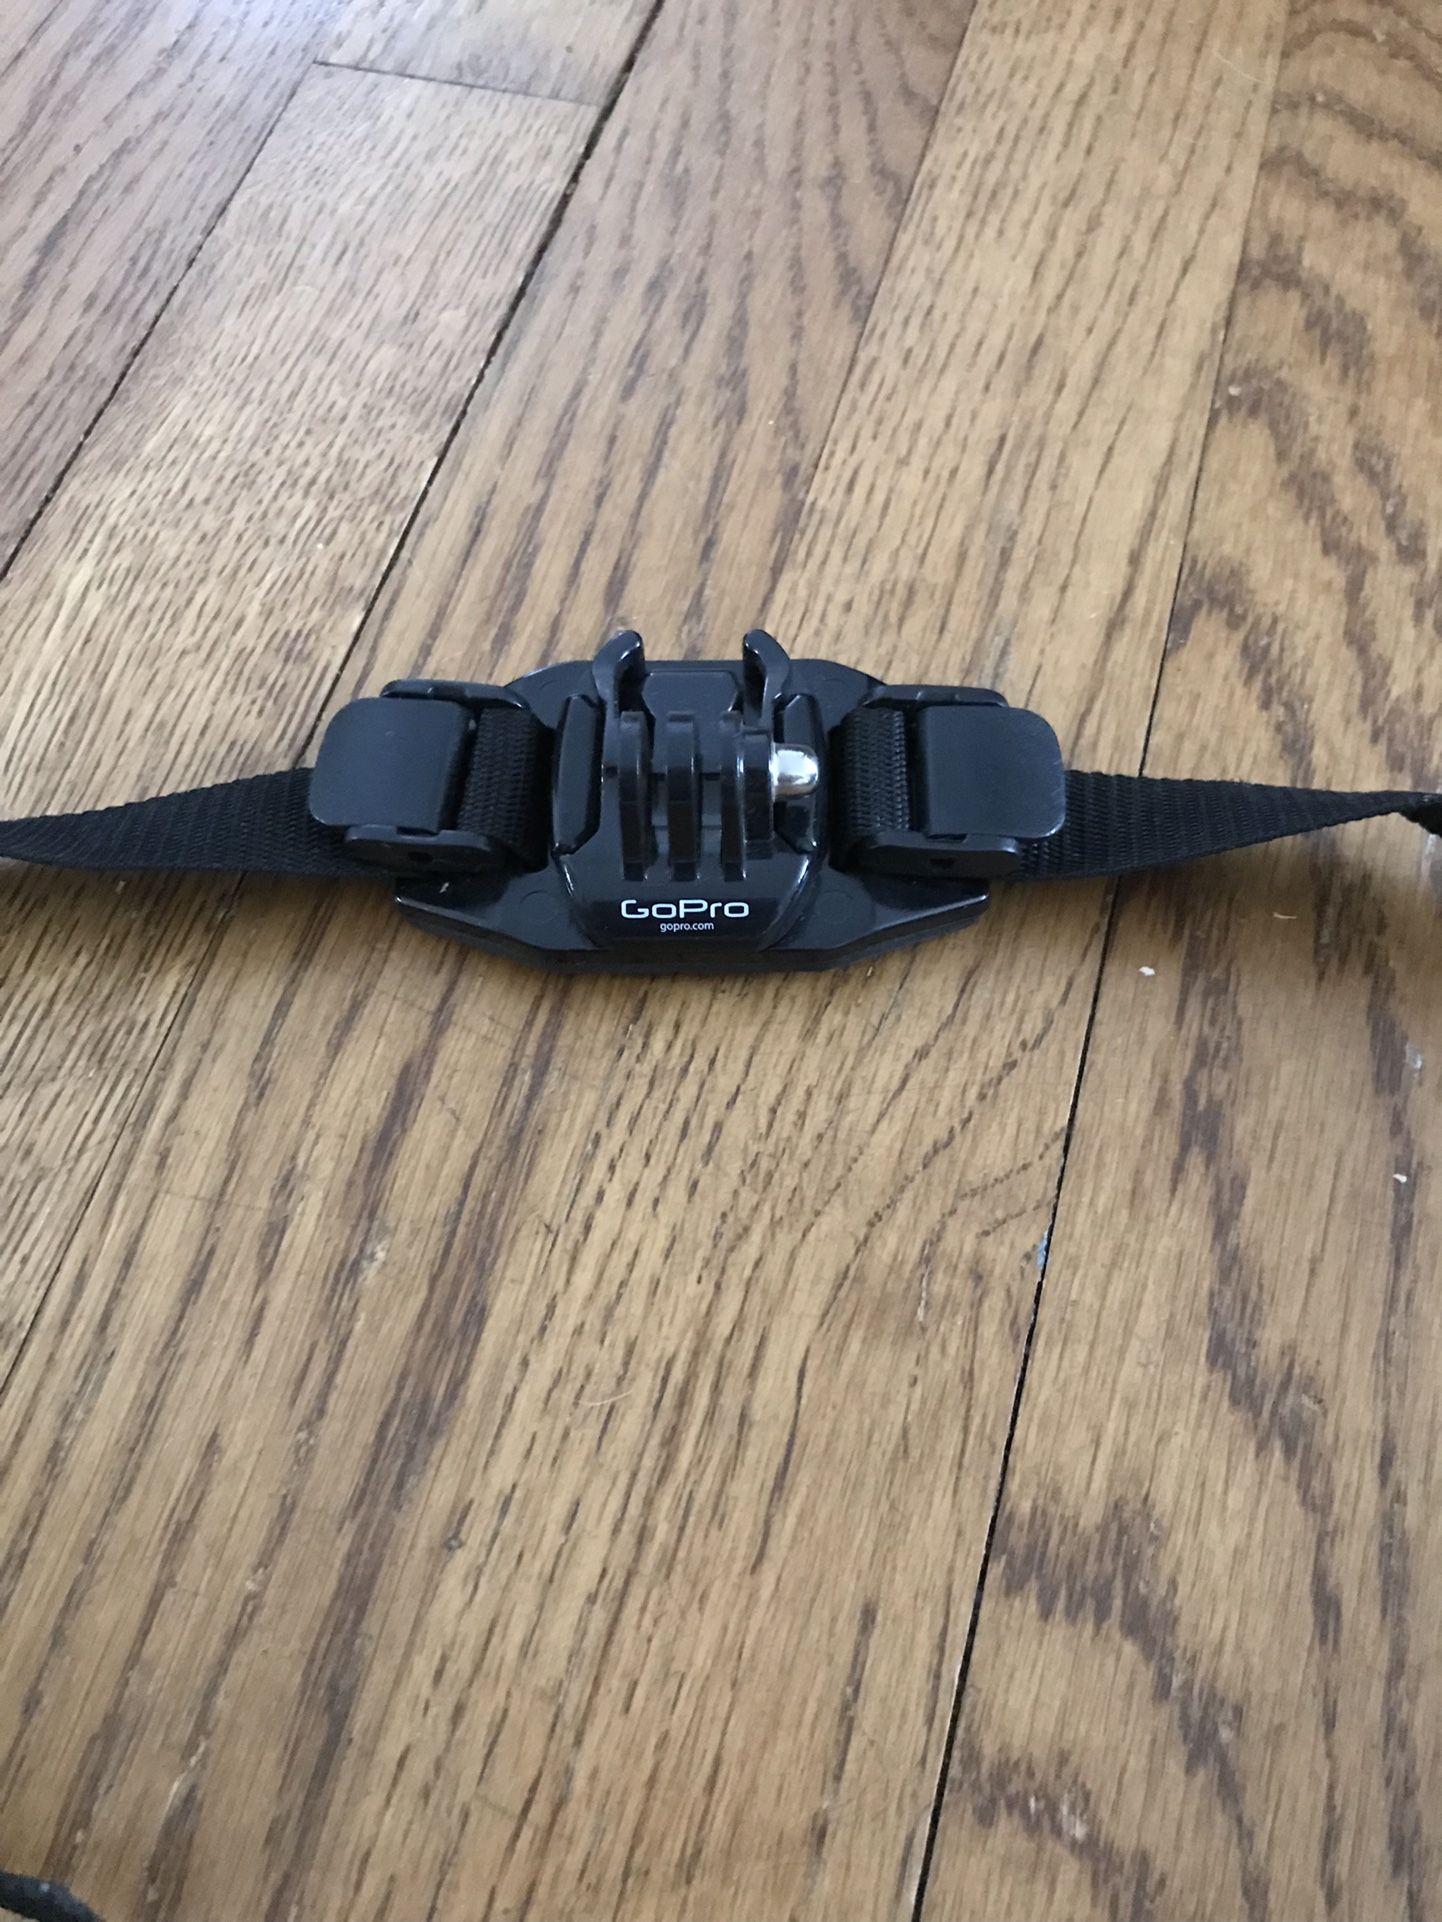 New GoPro Hero Head Strap And Quick Clip Including Used Accessories $20 For All